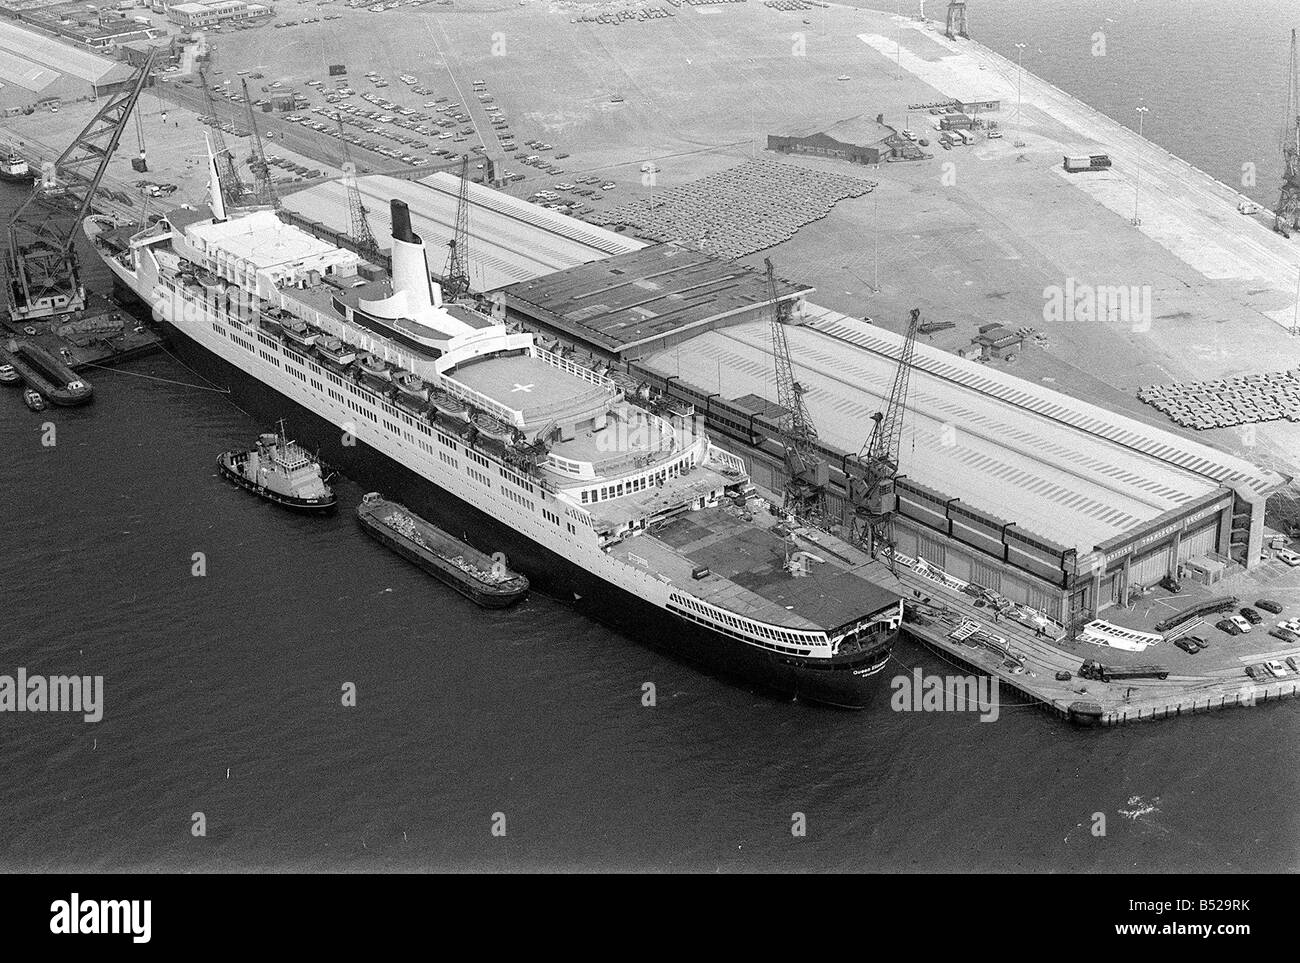 Ships Shipping Queen Elizabeth II May 1982 The QE2 at Southampton Arial View Stock Photo